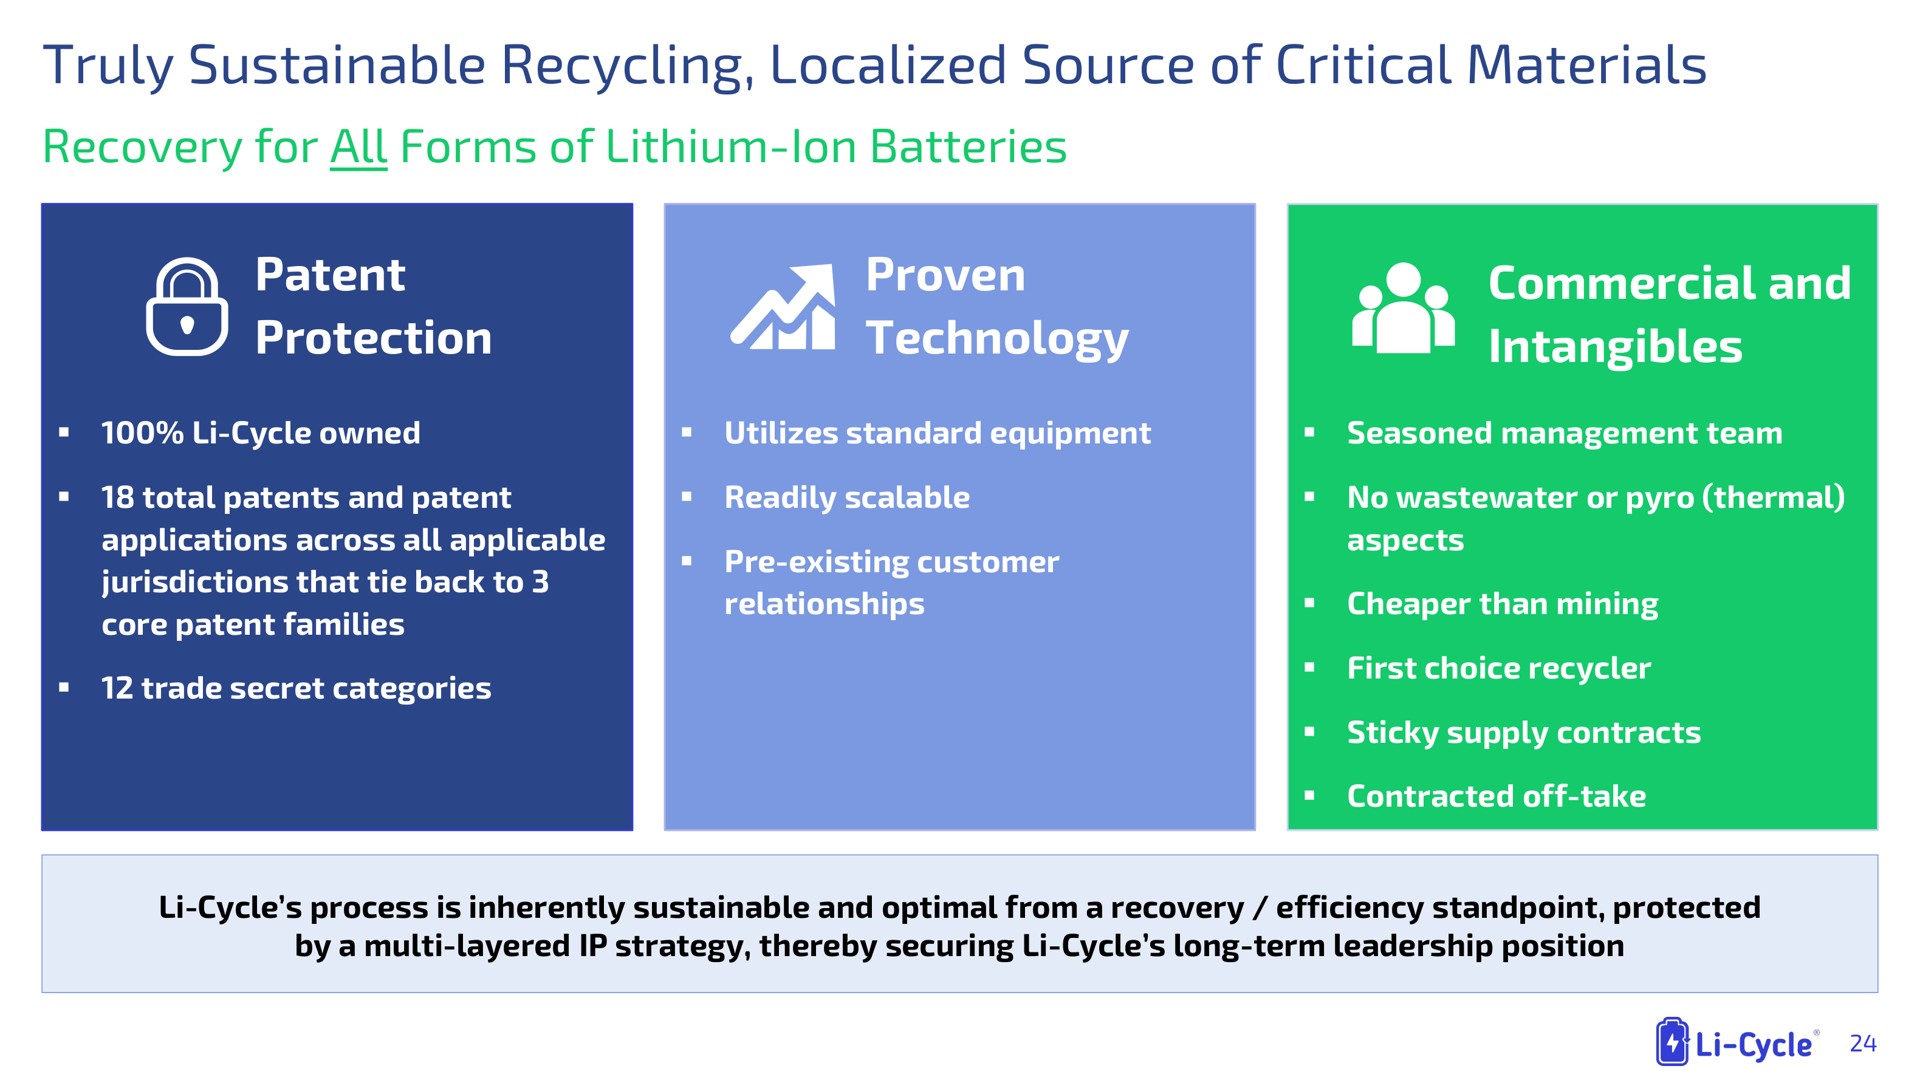 truly sustainable recycling localized source of critical materials recovery for all forms of lithium ion batteries patent protection proven technology commercial and intangibles lithium areal a a pee yee lar | Li-Cycle